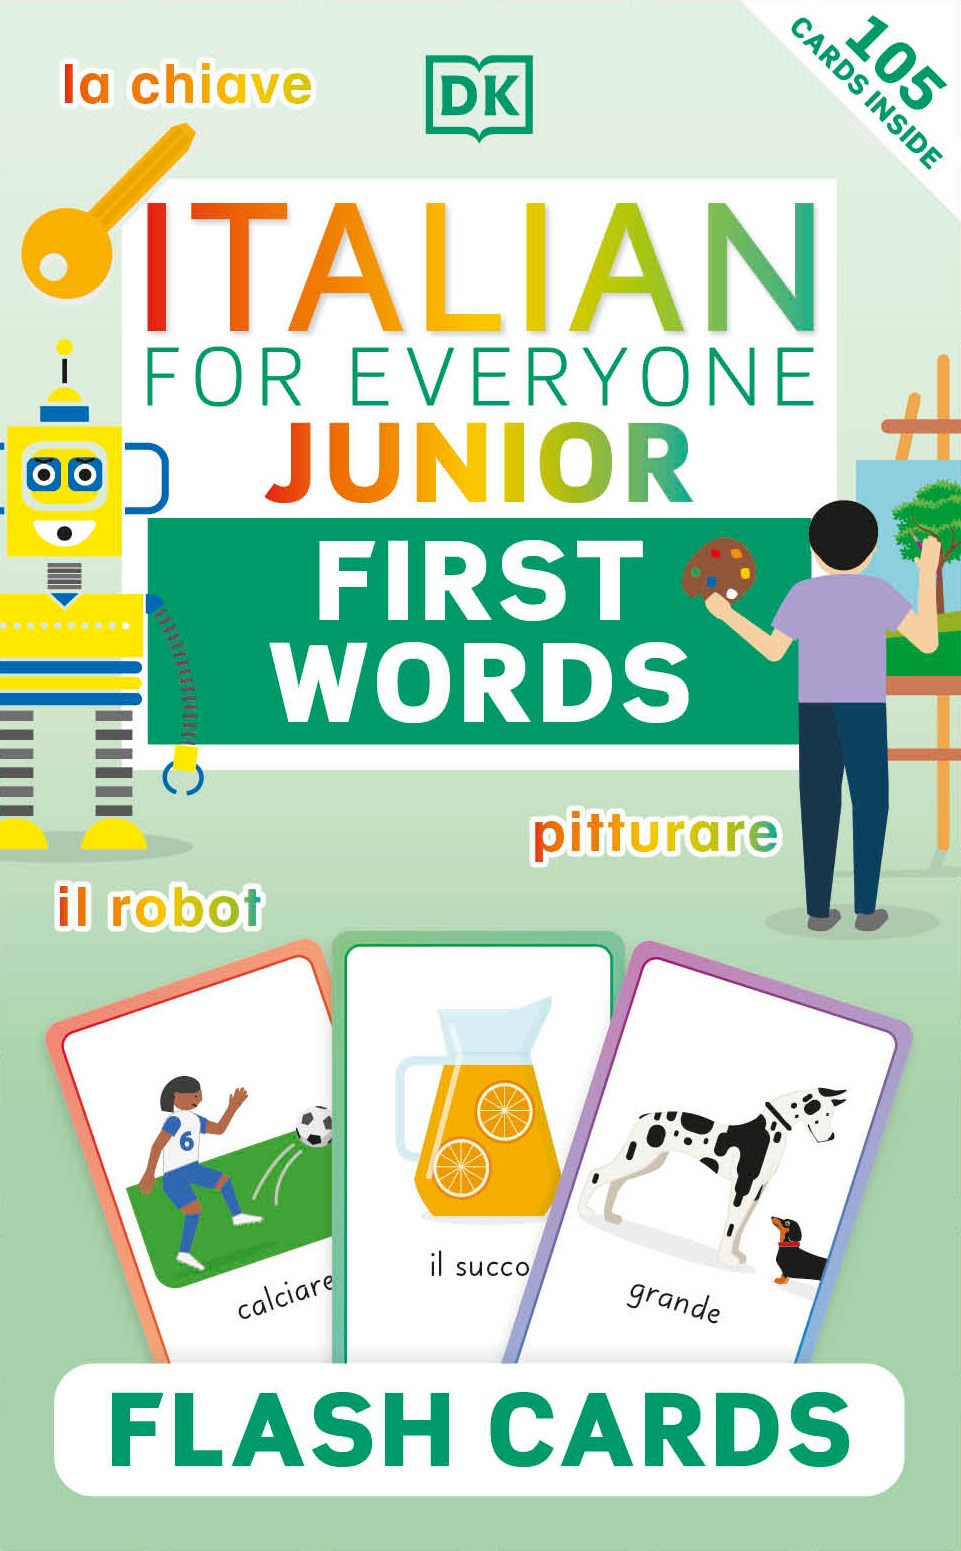 Italian for Everyone Junior First Words Flash Cards